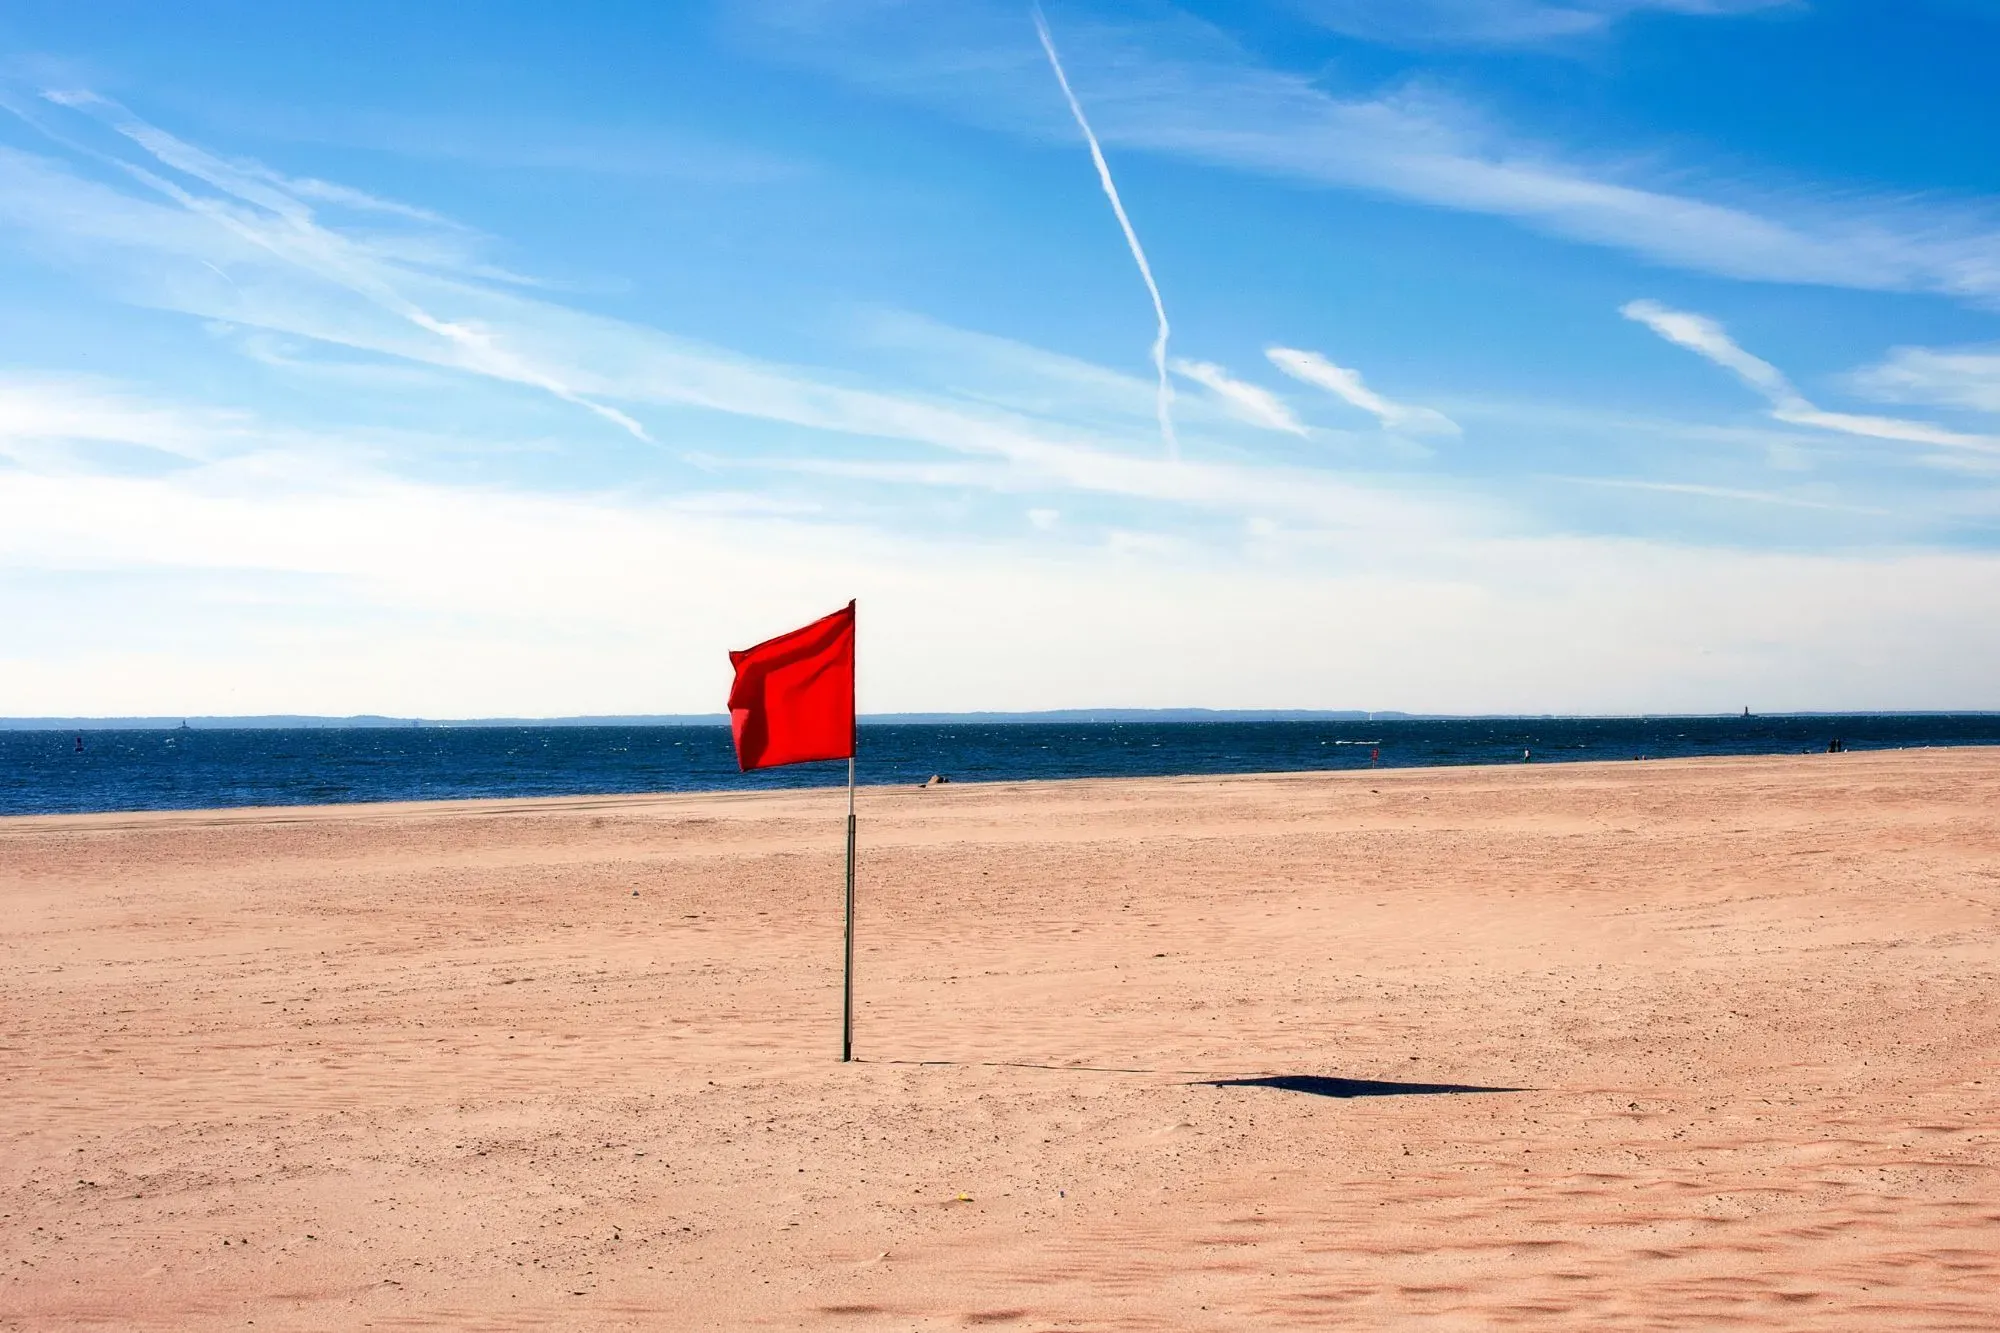 A red flag on the beach giving a warning sign